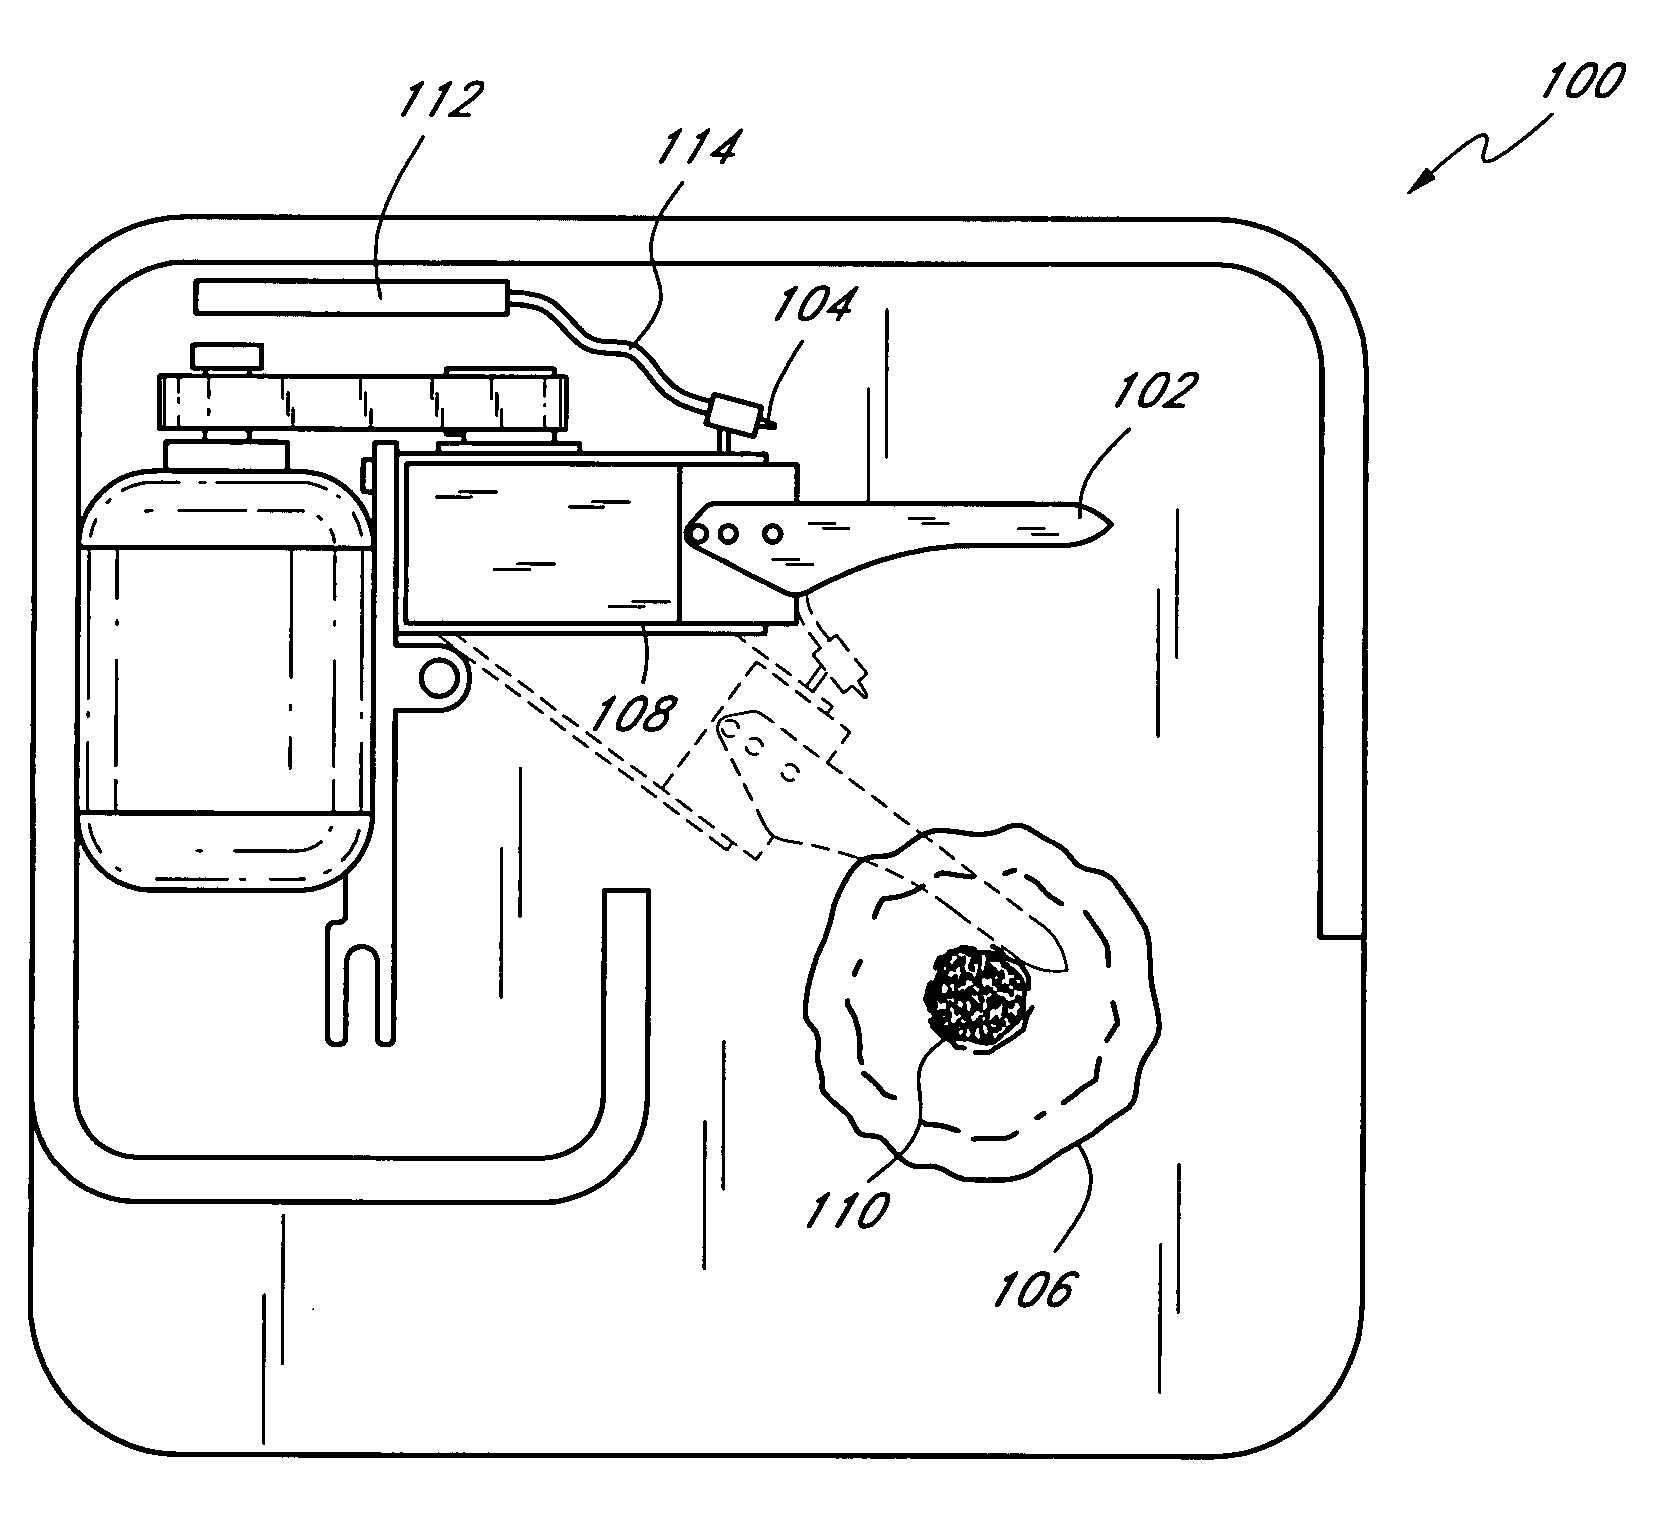 Apparatus and methods for processing meat